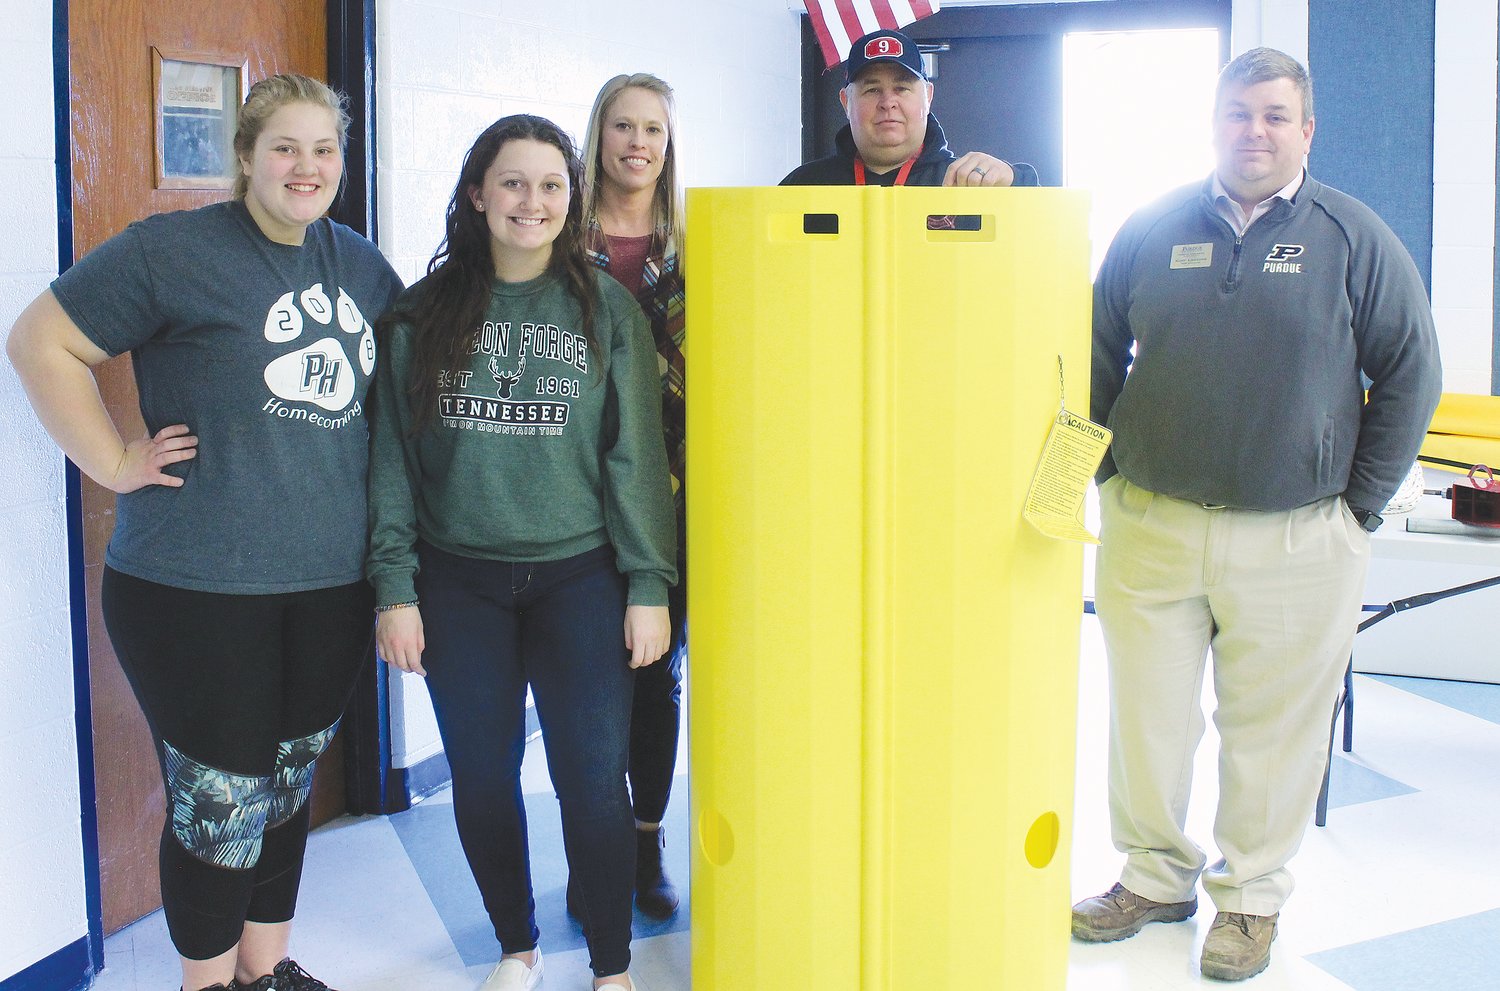 With the grain bin rescue tube used by fire departments are Mandy Girdler, Madison Nelson, Lacy Romig, Jason Games and Kurt Lanzone.